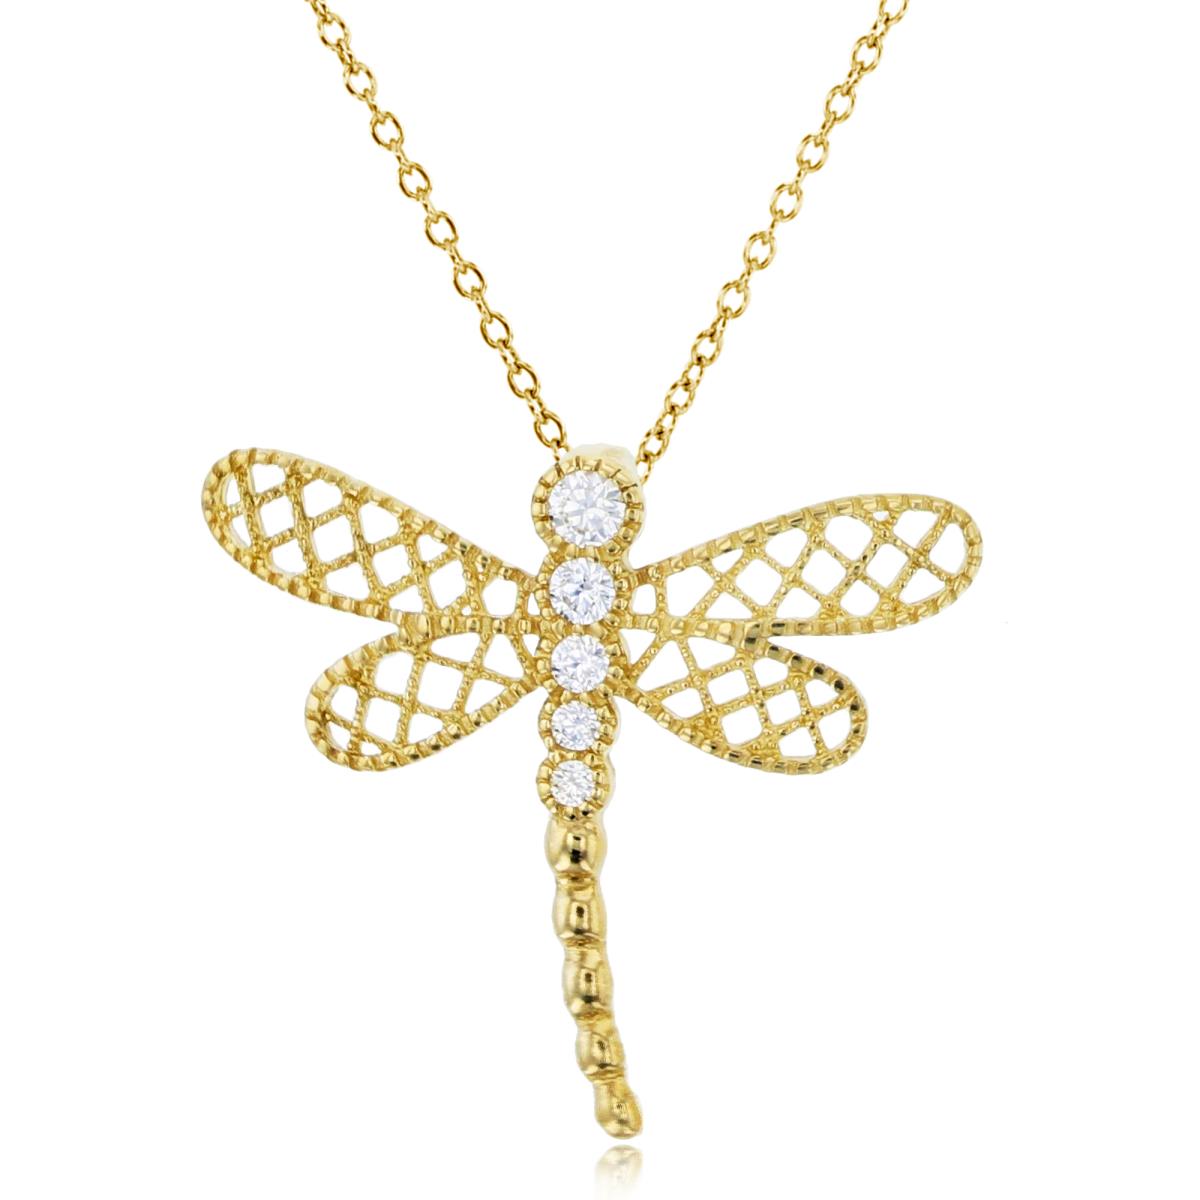 14K Yellow Gold Polished & Milgrain Dragonfly 18" Necklace